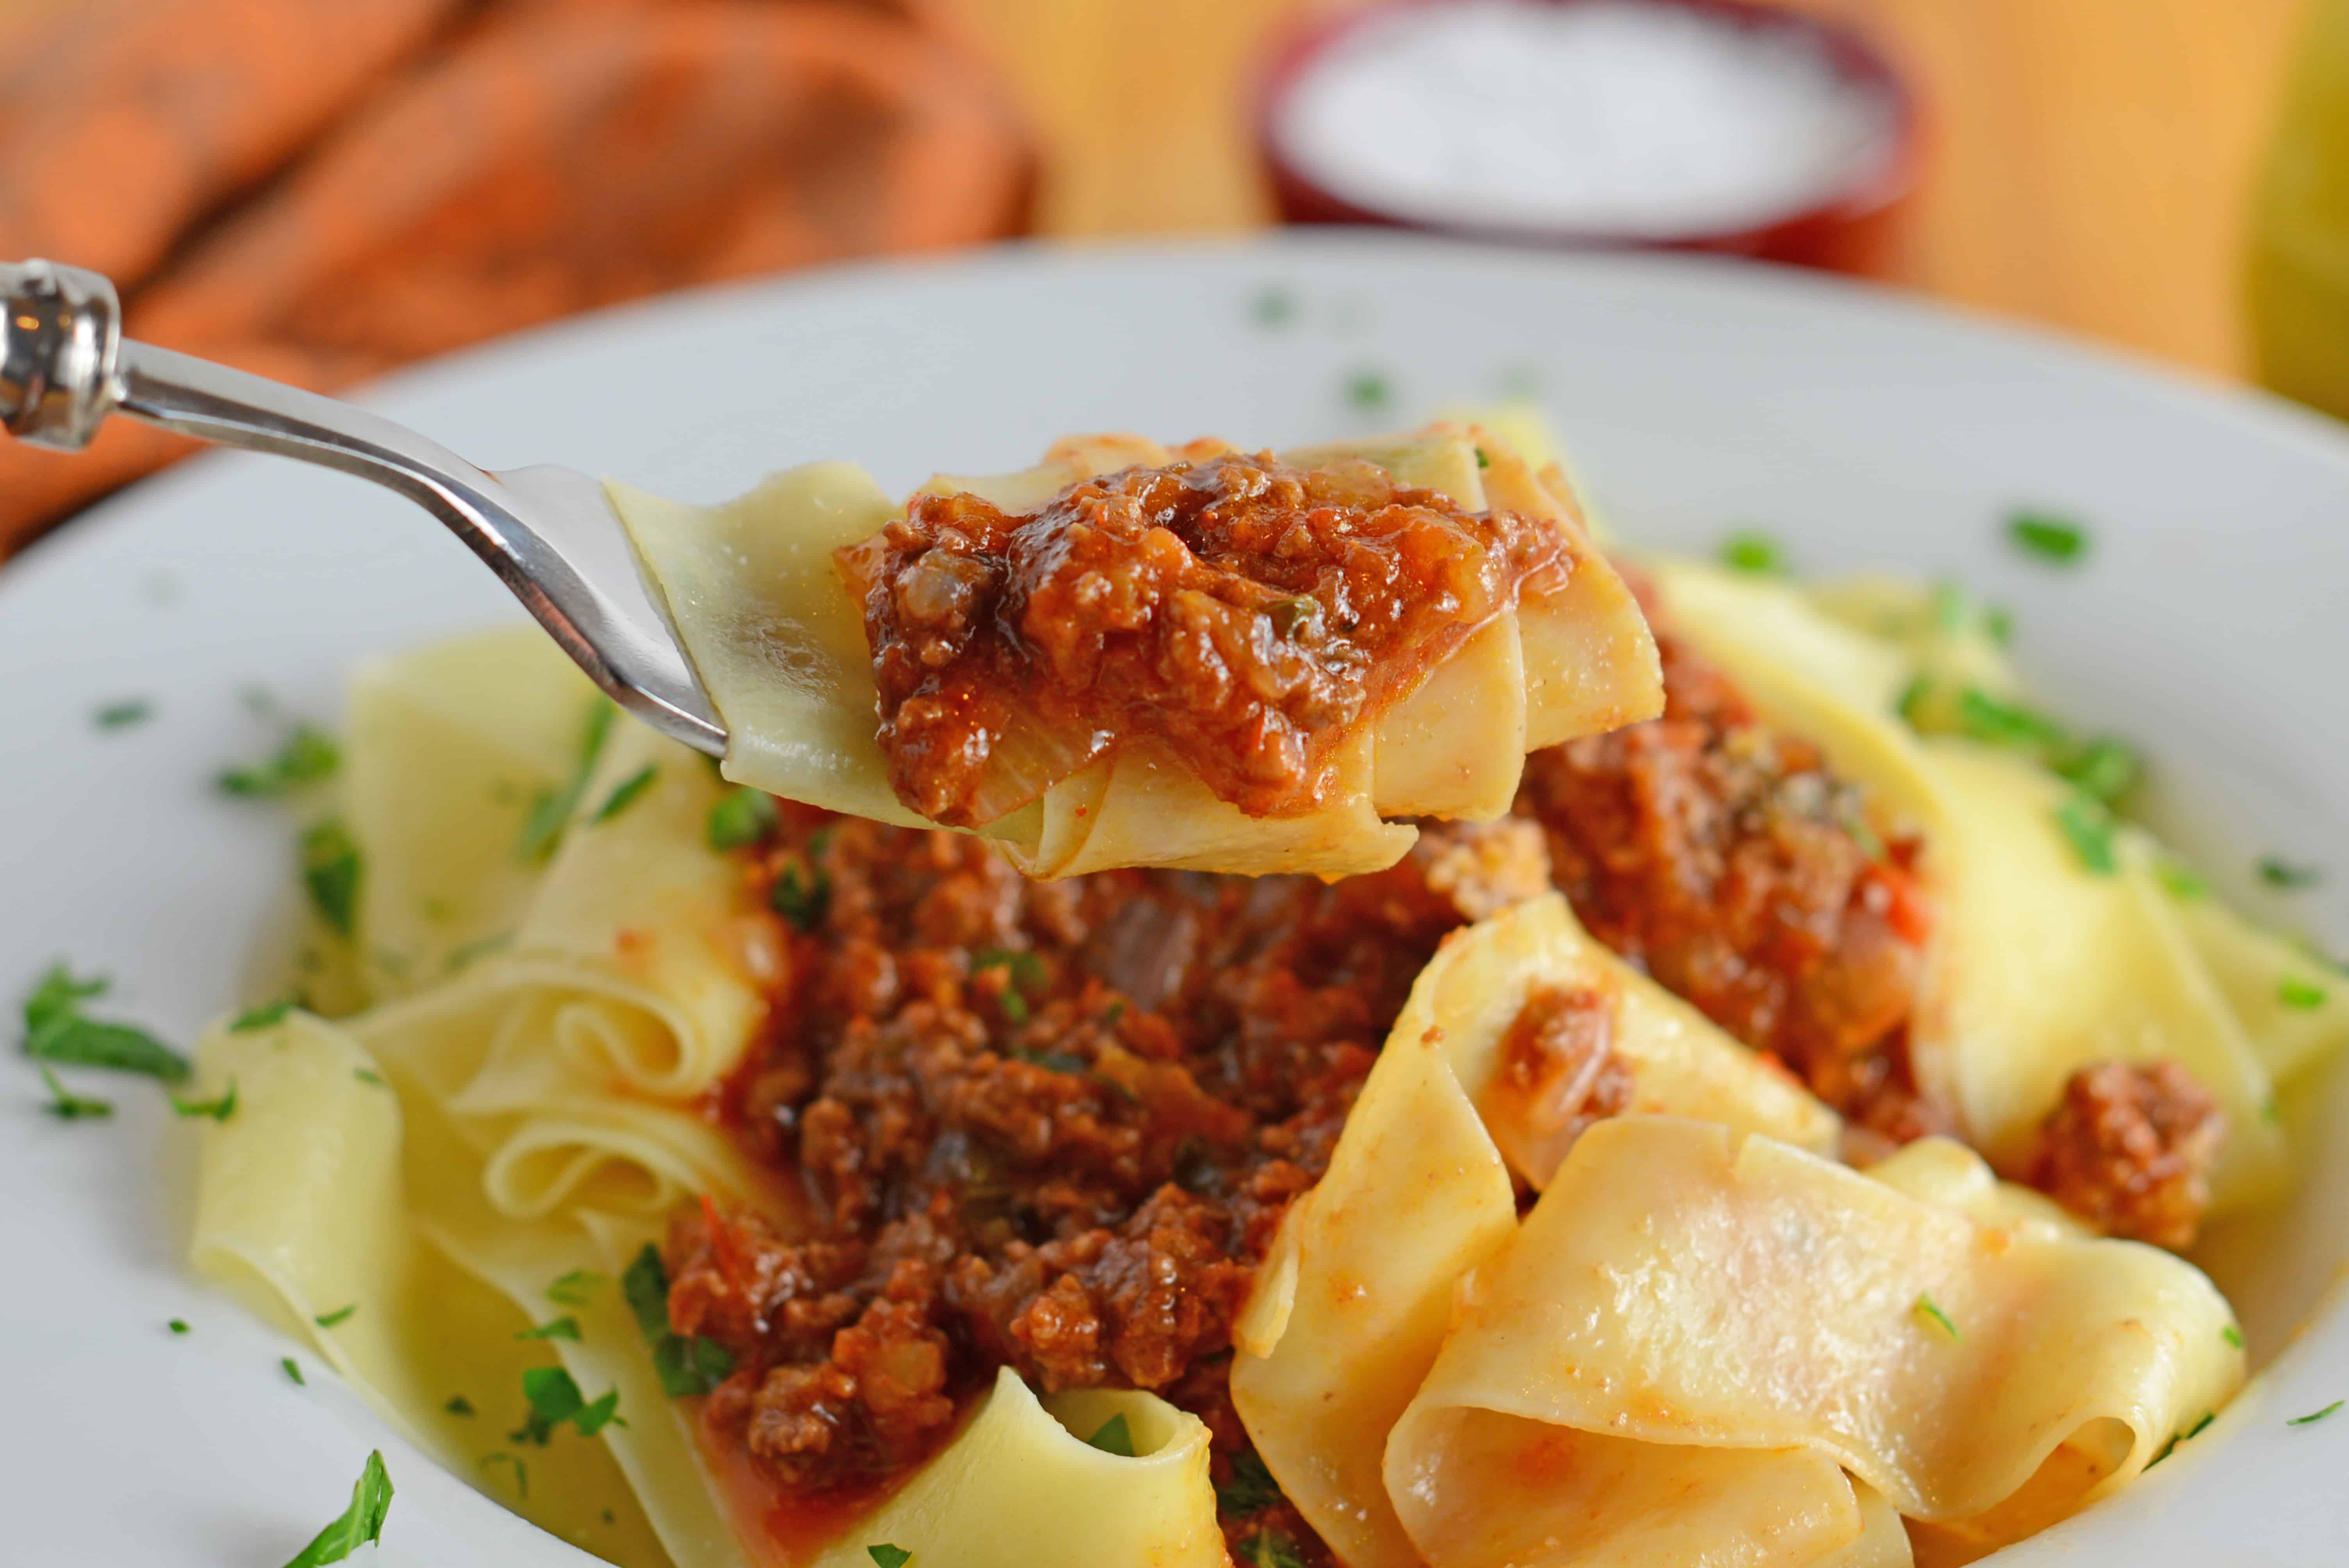 Bolognese Sauce is a classic, rich and hearty Italian sauce made with ground meat and coarsely chopped vegetables. Serve over pasta or in lasagna.